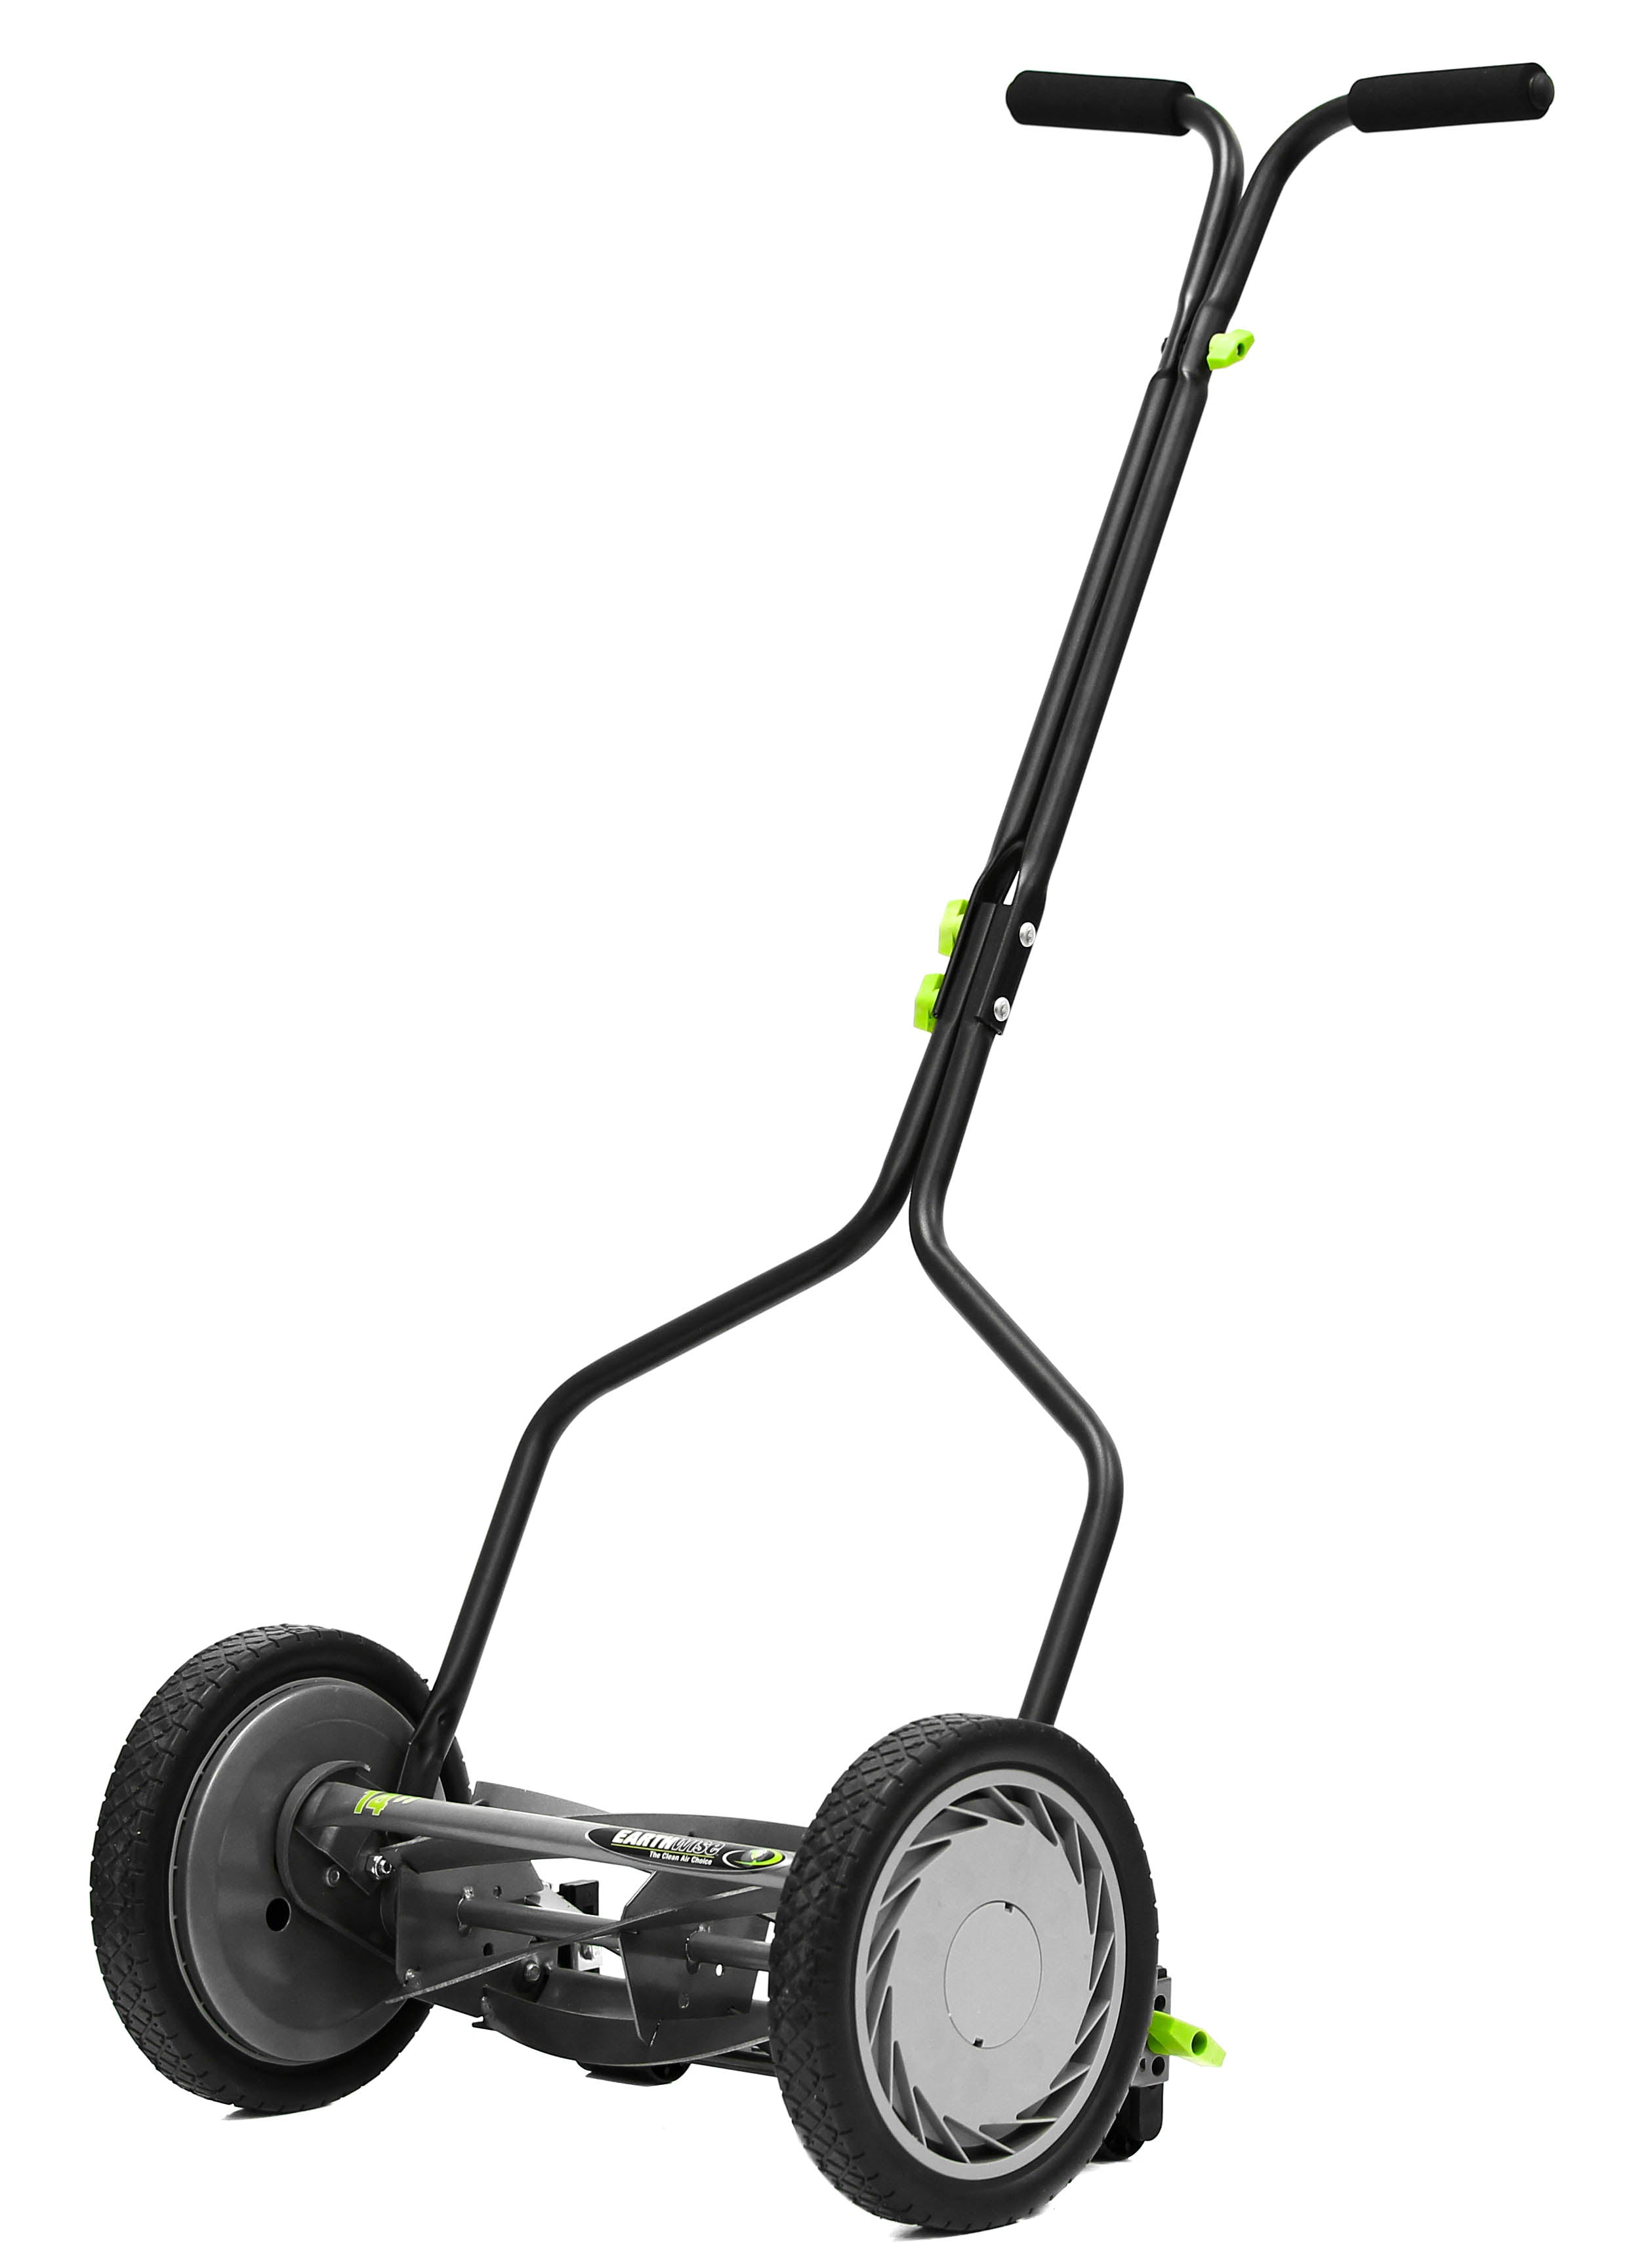 Earthwise Power Tools by ALM 14" Manual Reel Mower